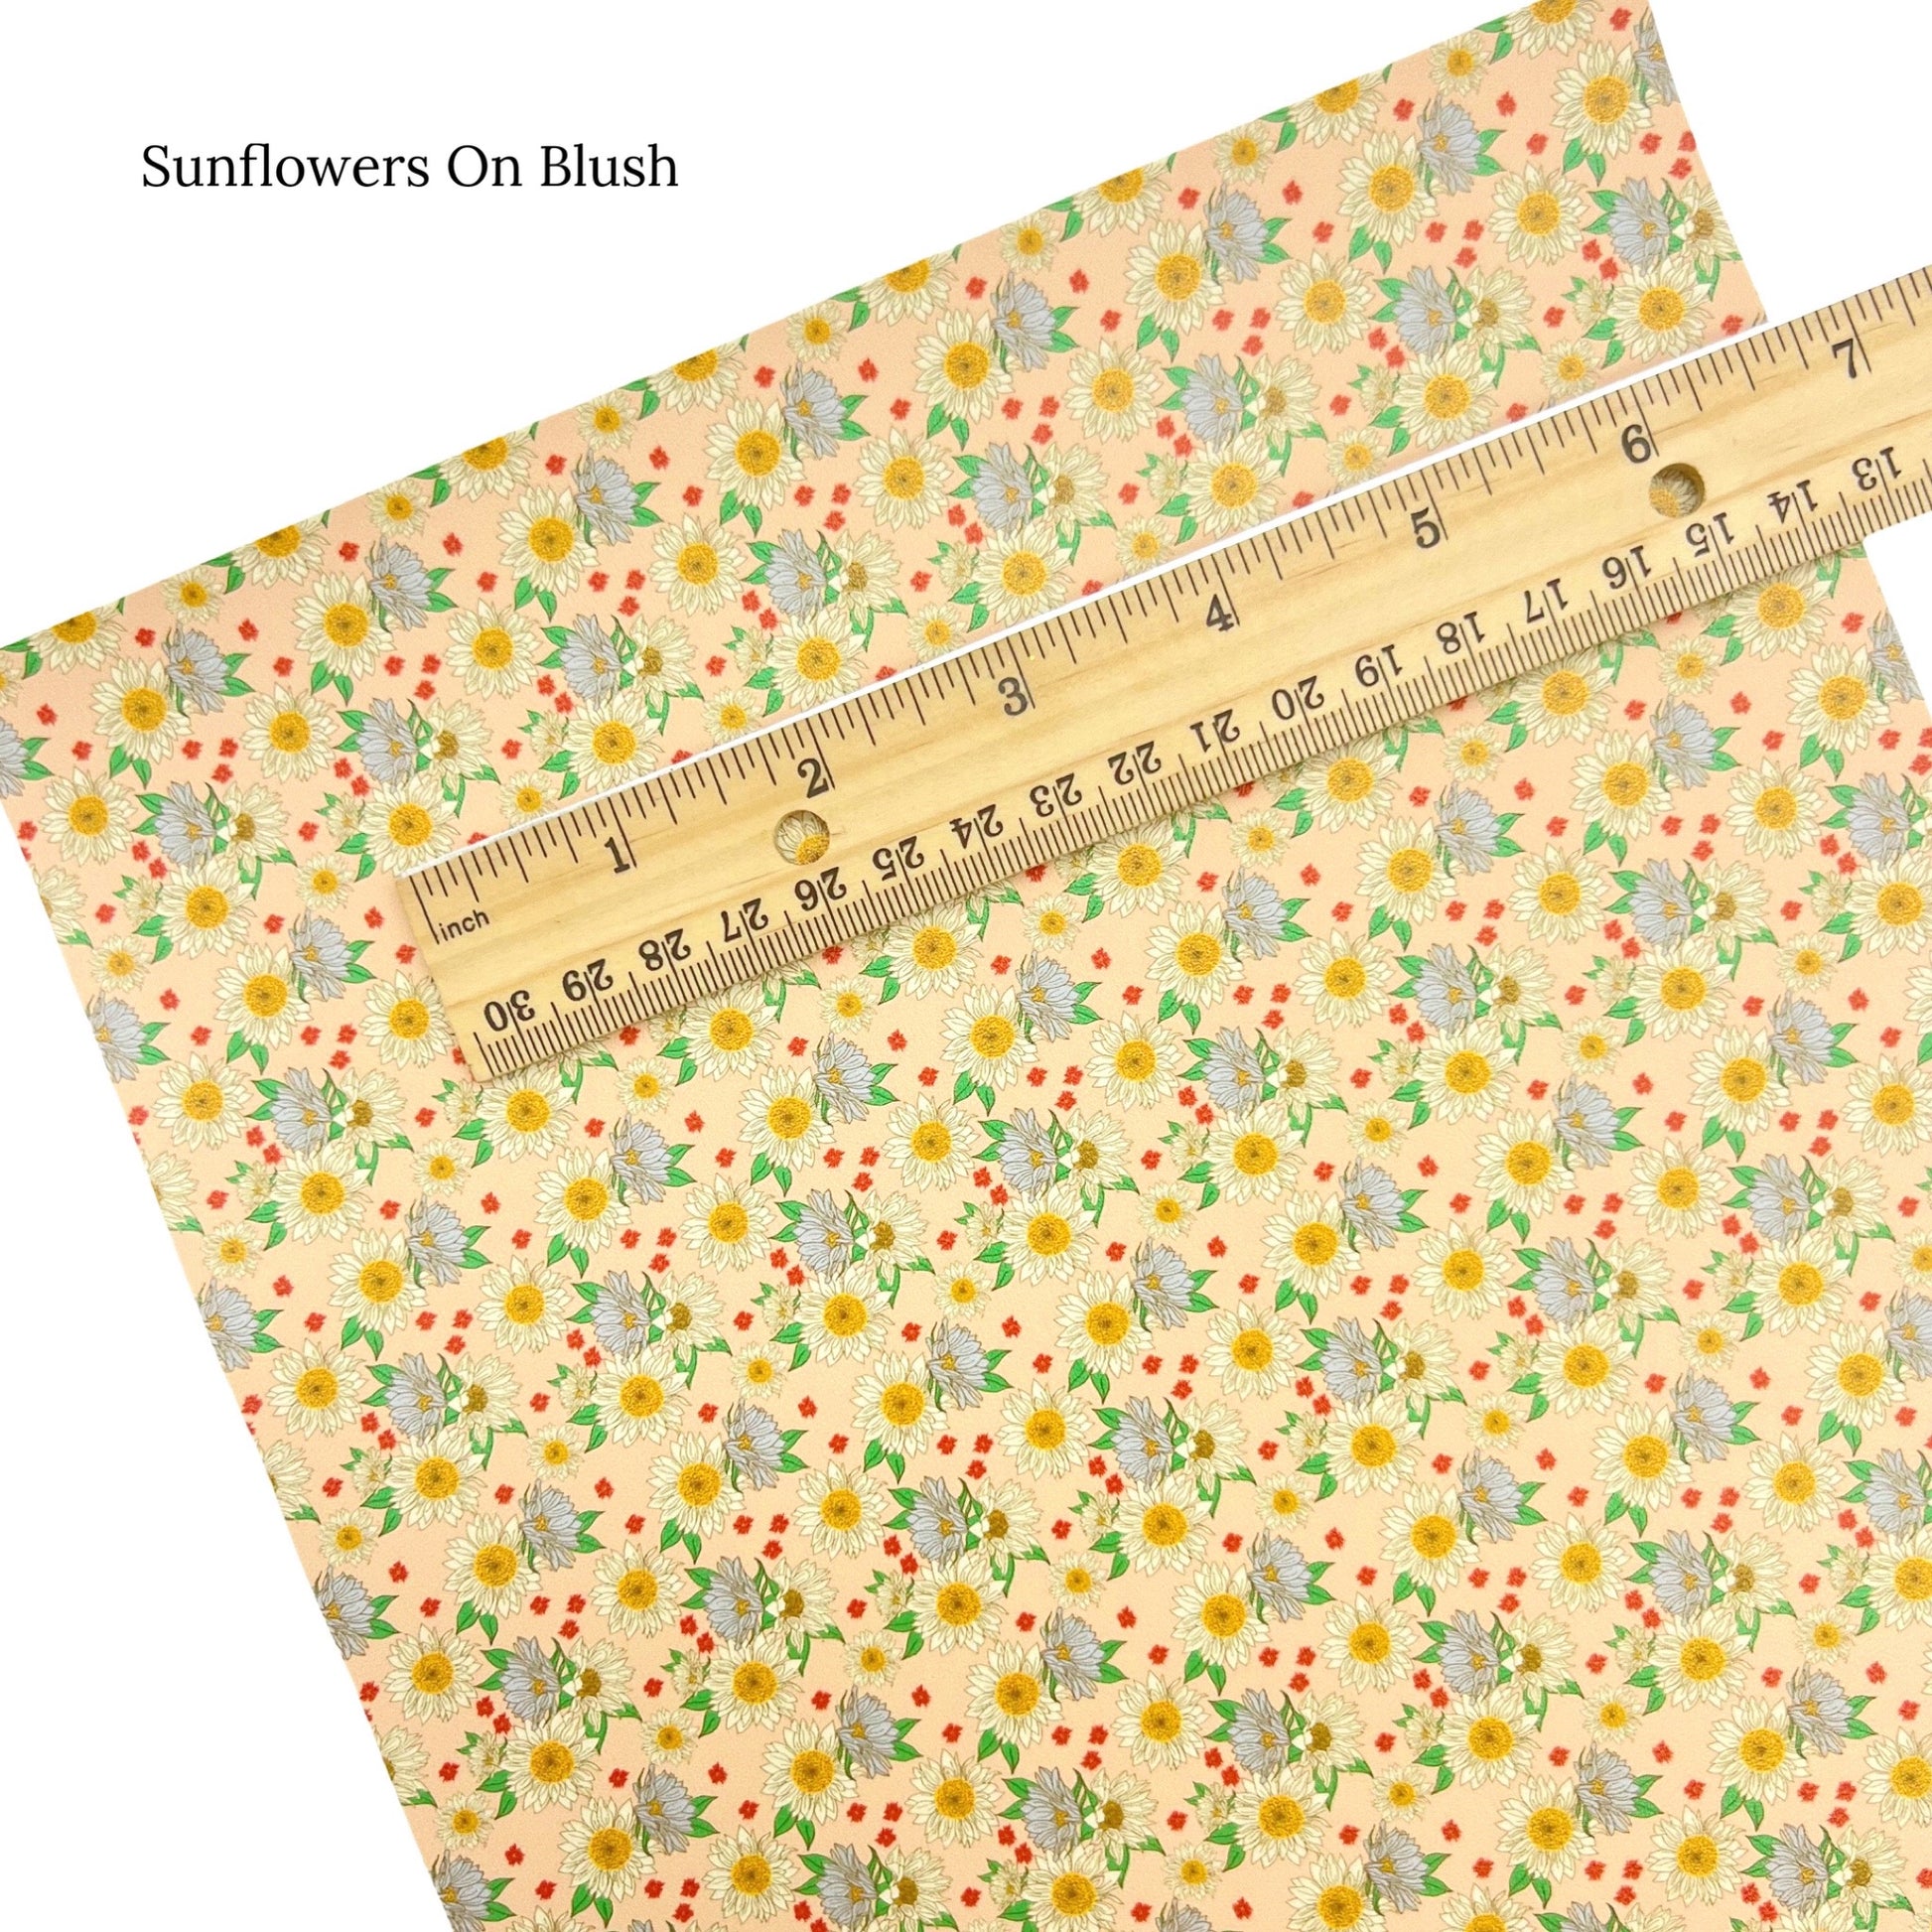 Sunflowers on blush faux leather sheet.